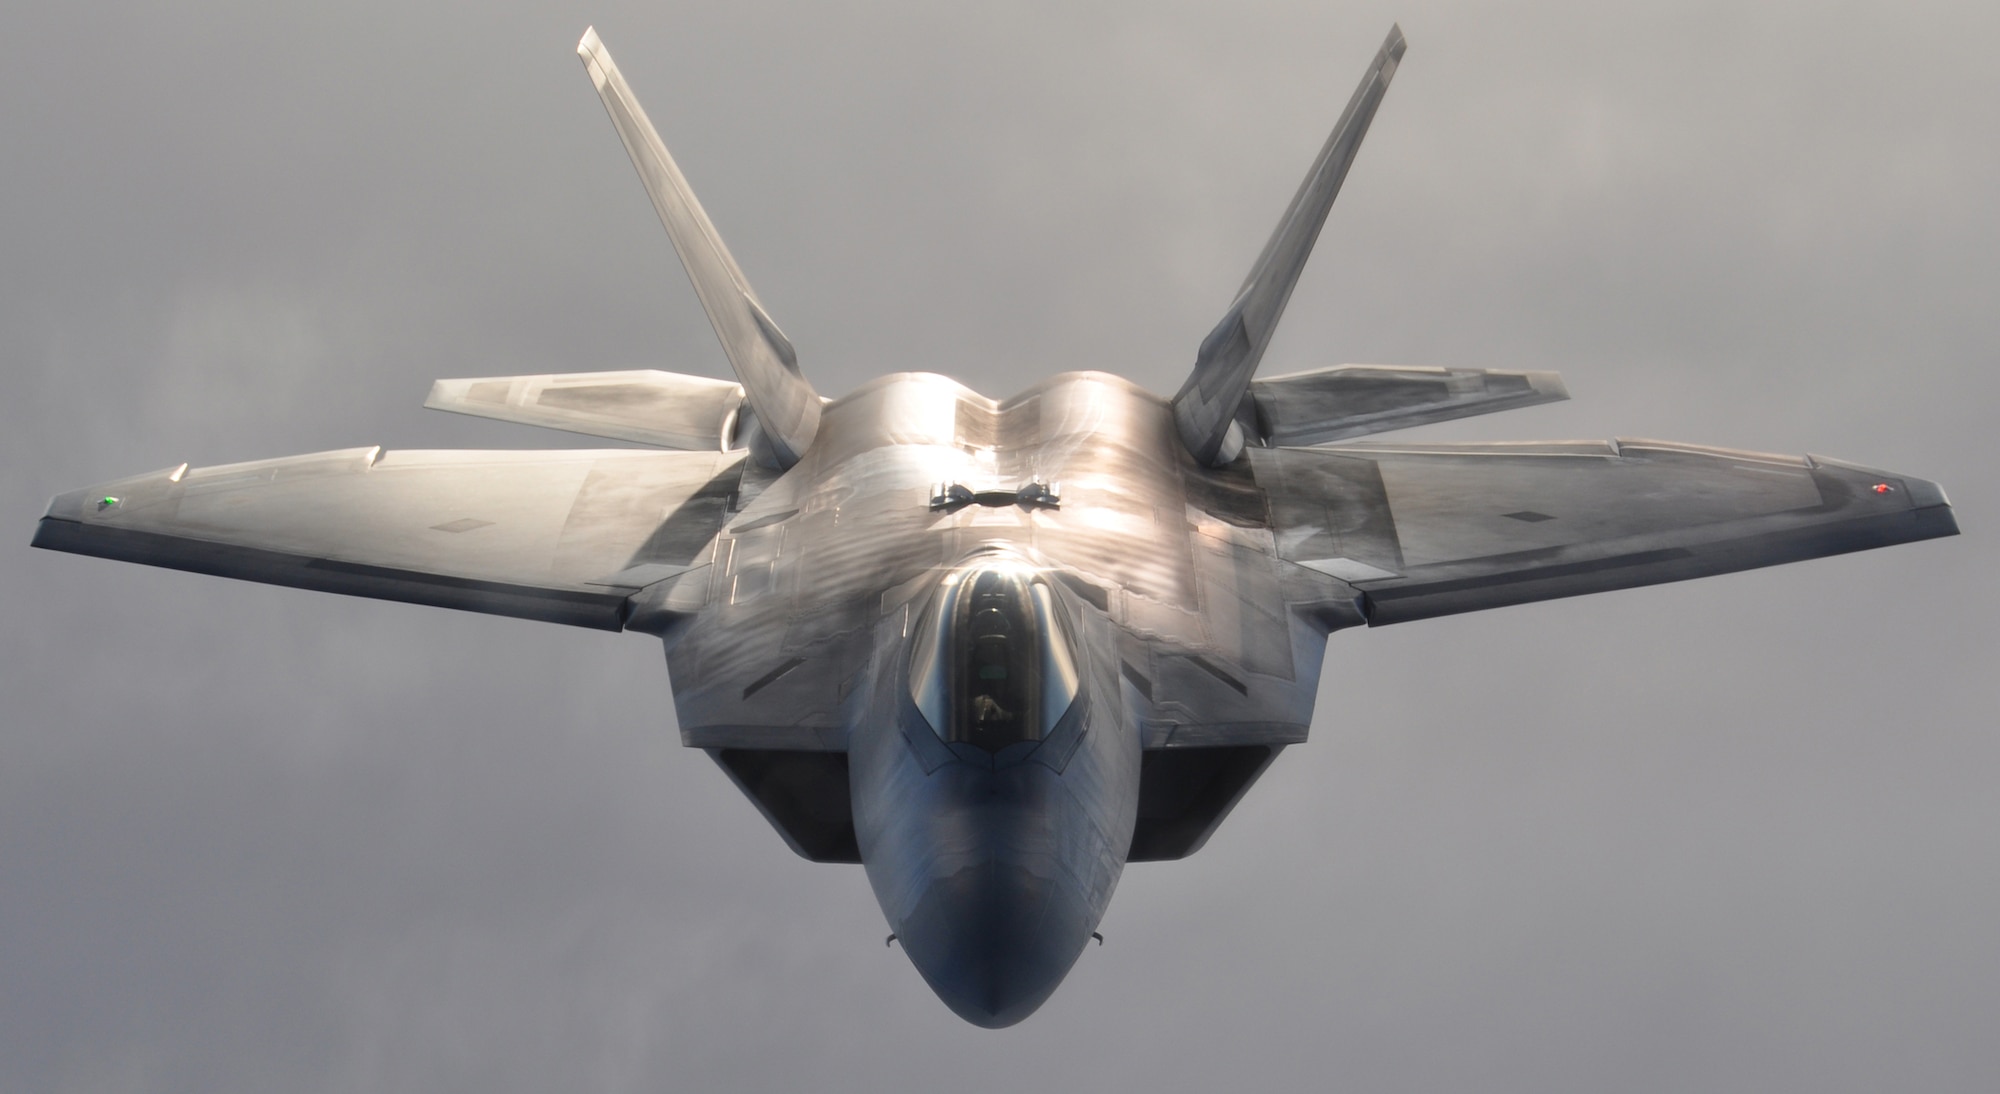 An F-22 Raptor flies over Alaska terrain after refueling Jan. 5, 2013. The F-22 is assigned to the 3rd Wing and flown by a Reserve pilot assigned to the 302nd Fighter Squadron at Elmendorf Air Force Base, Alaska. (U.S. Air Force Reserve photo/Tech. Sgt. Dana Rosso)
